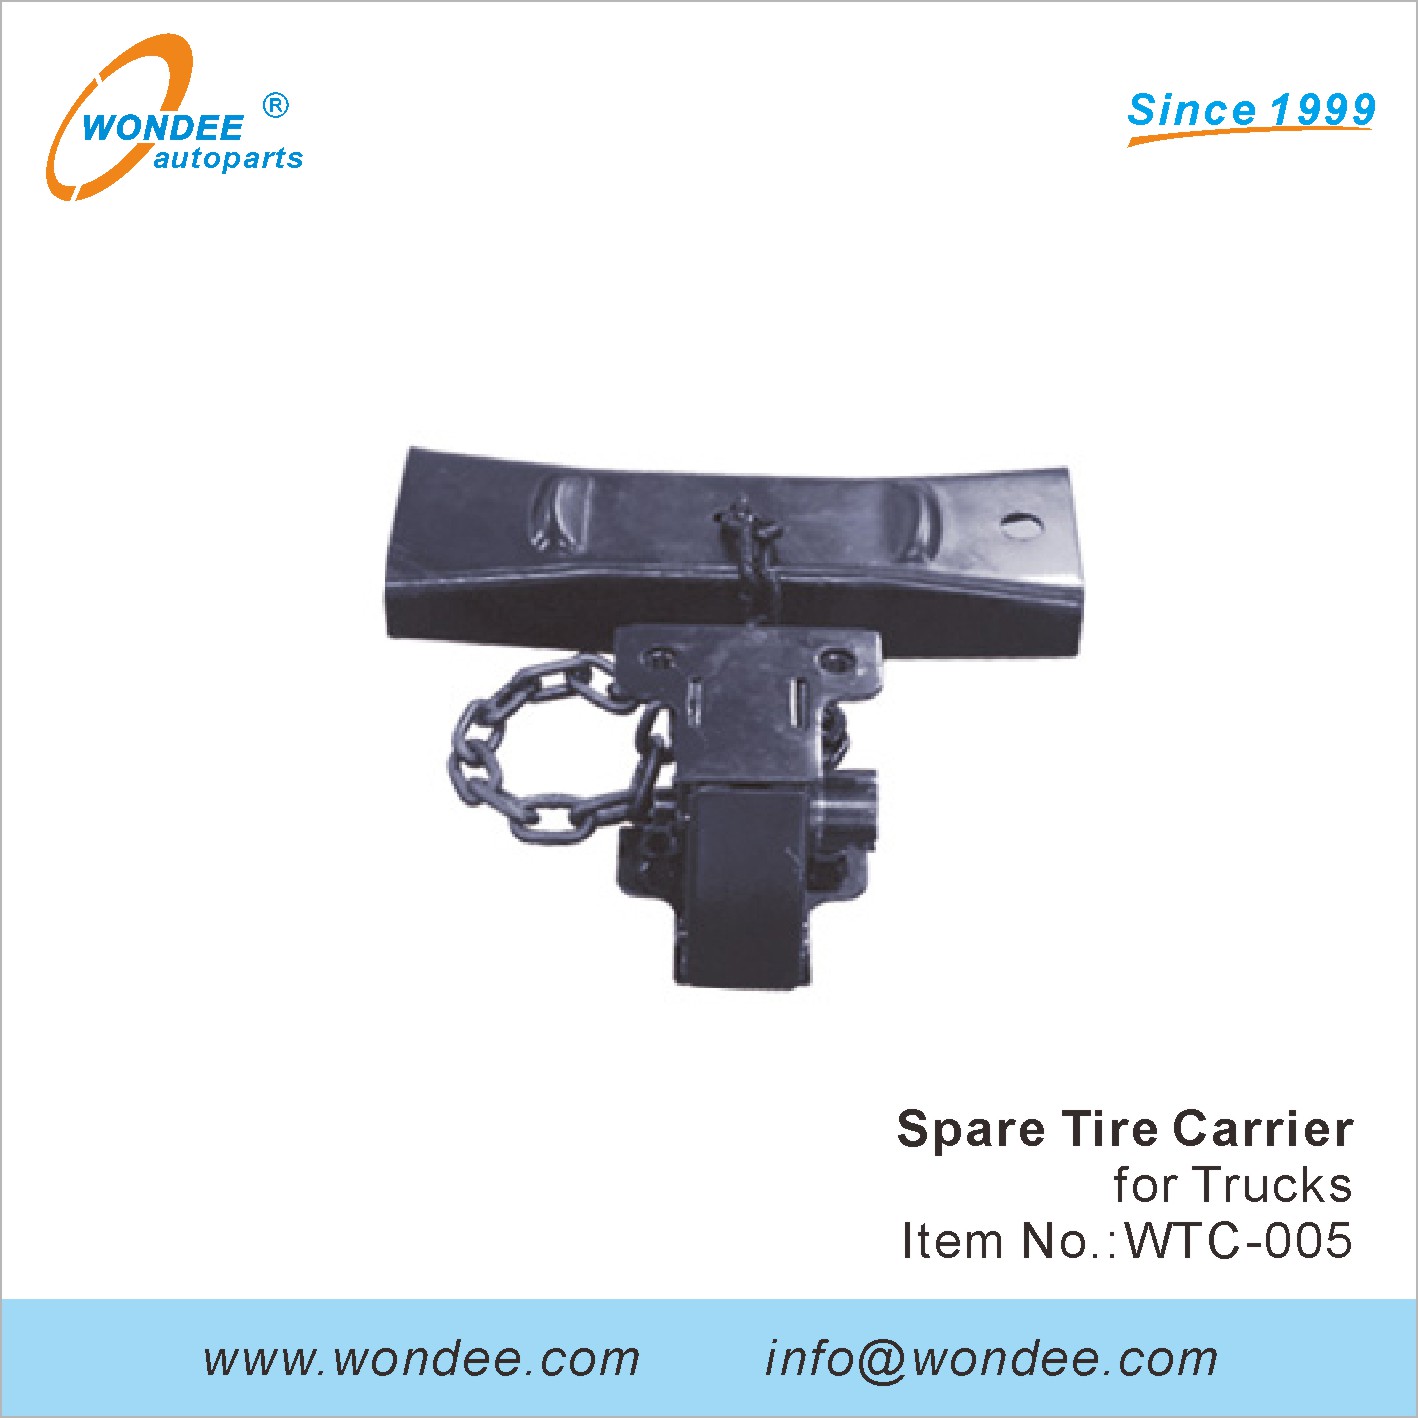 WONDEE spare tire carrier (5)